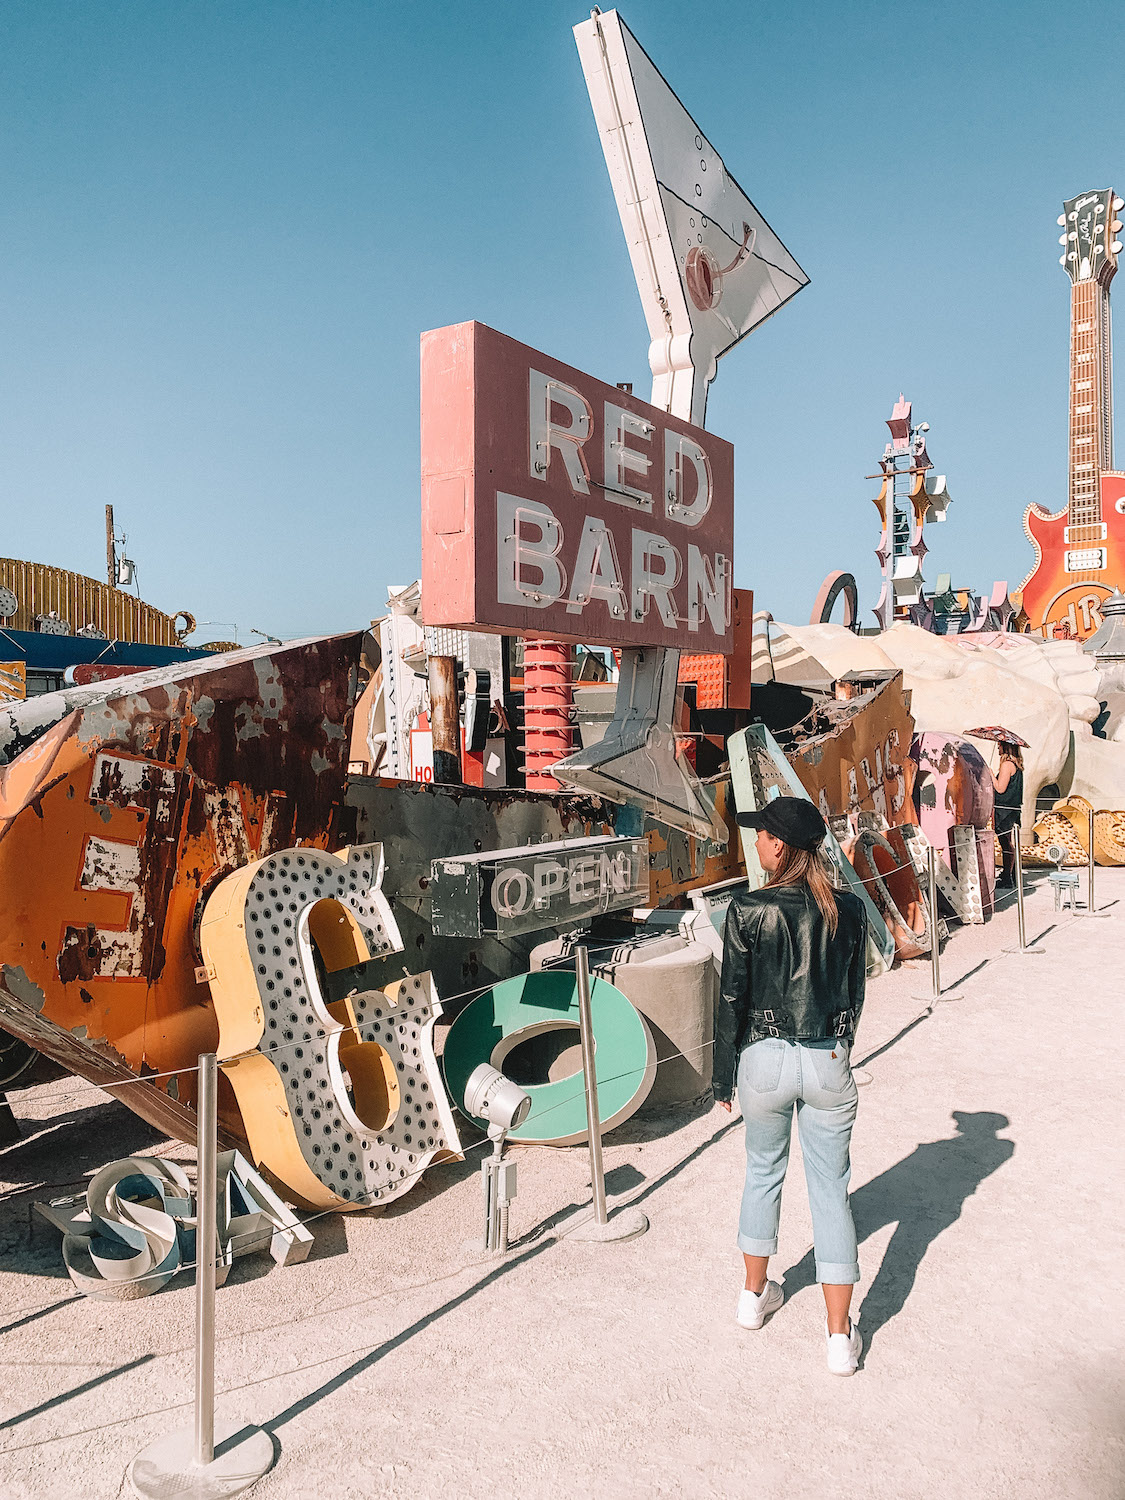 Elyse walking in the Neon Museum, in front of her are old neon signs leaning up against each other. A holiday that is included in my recap of the year.